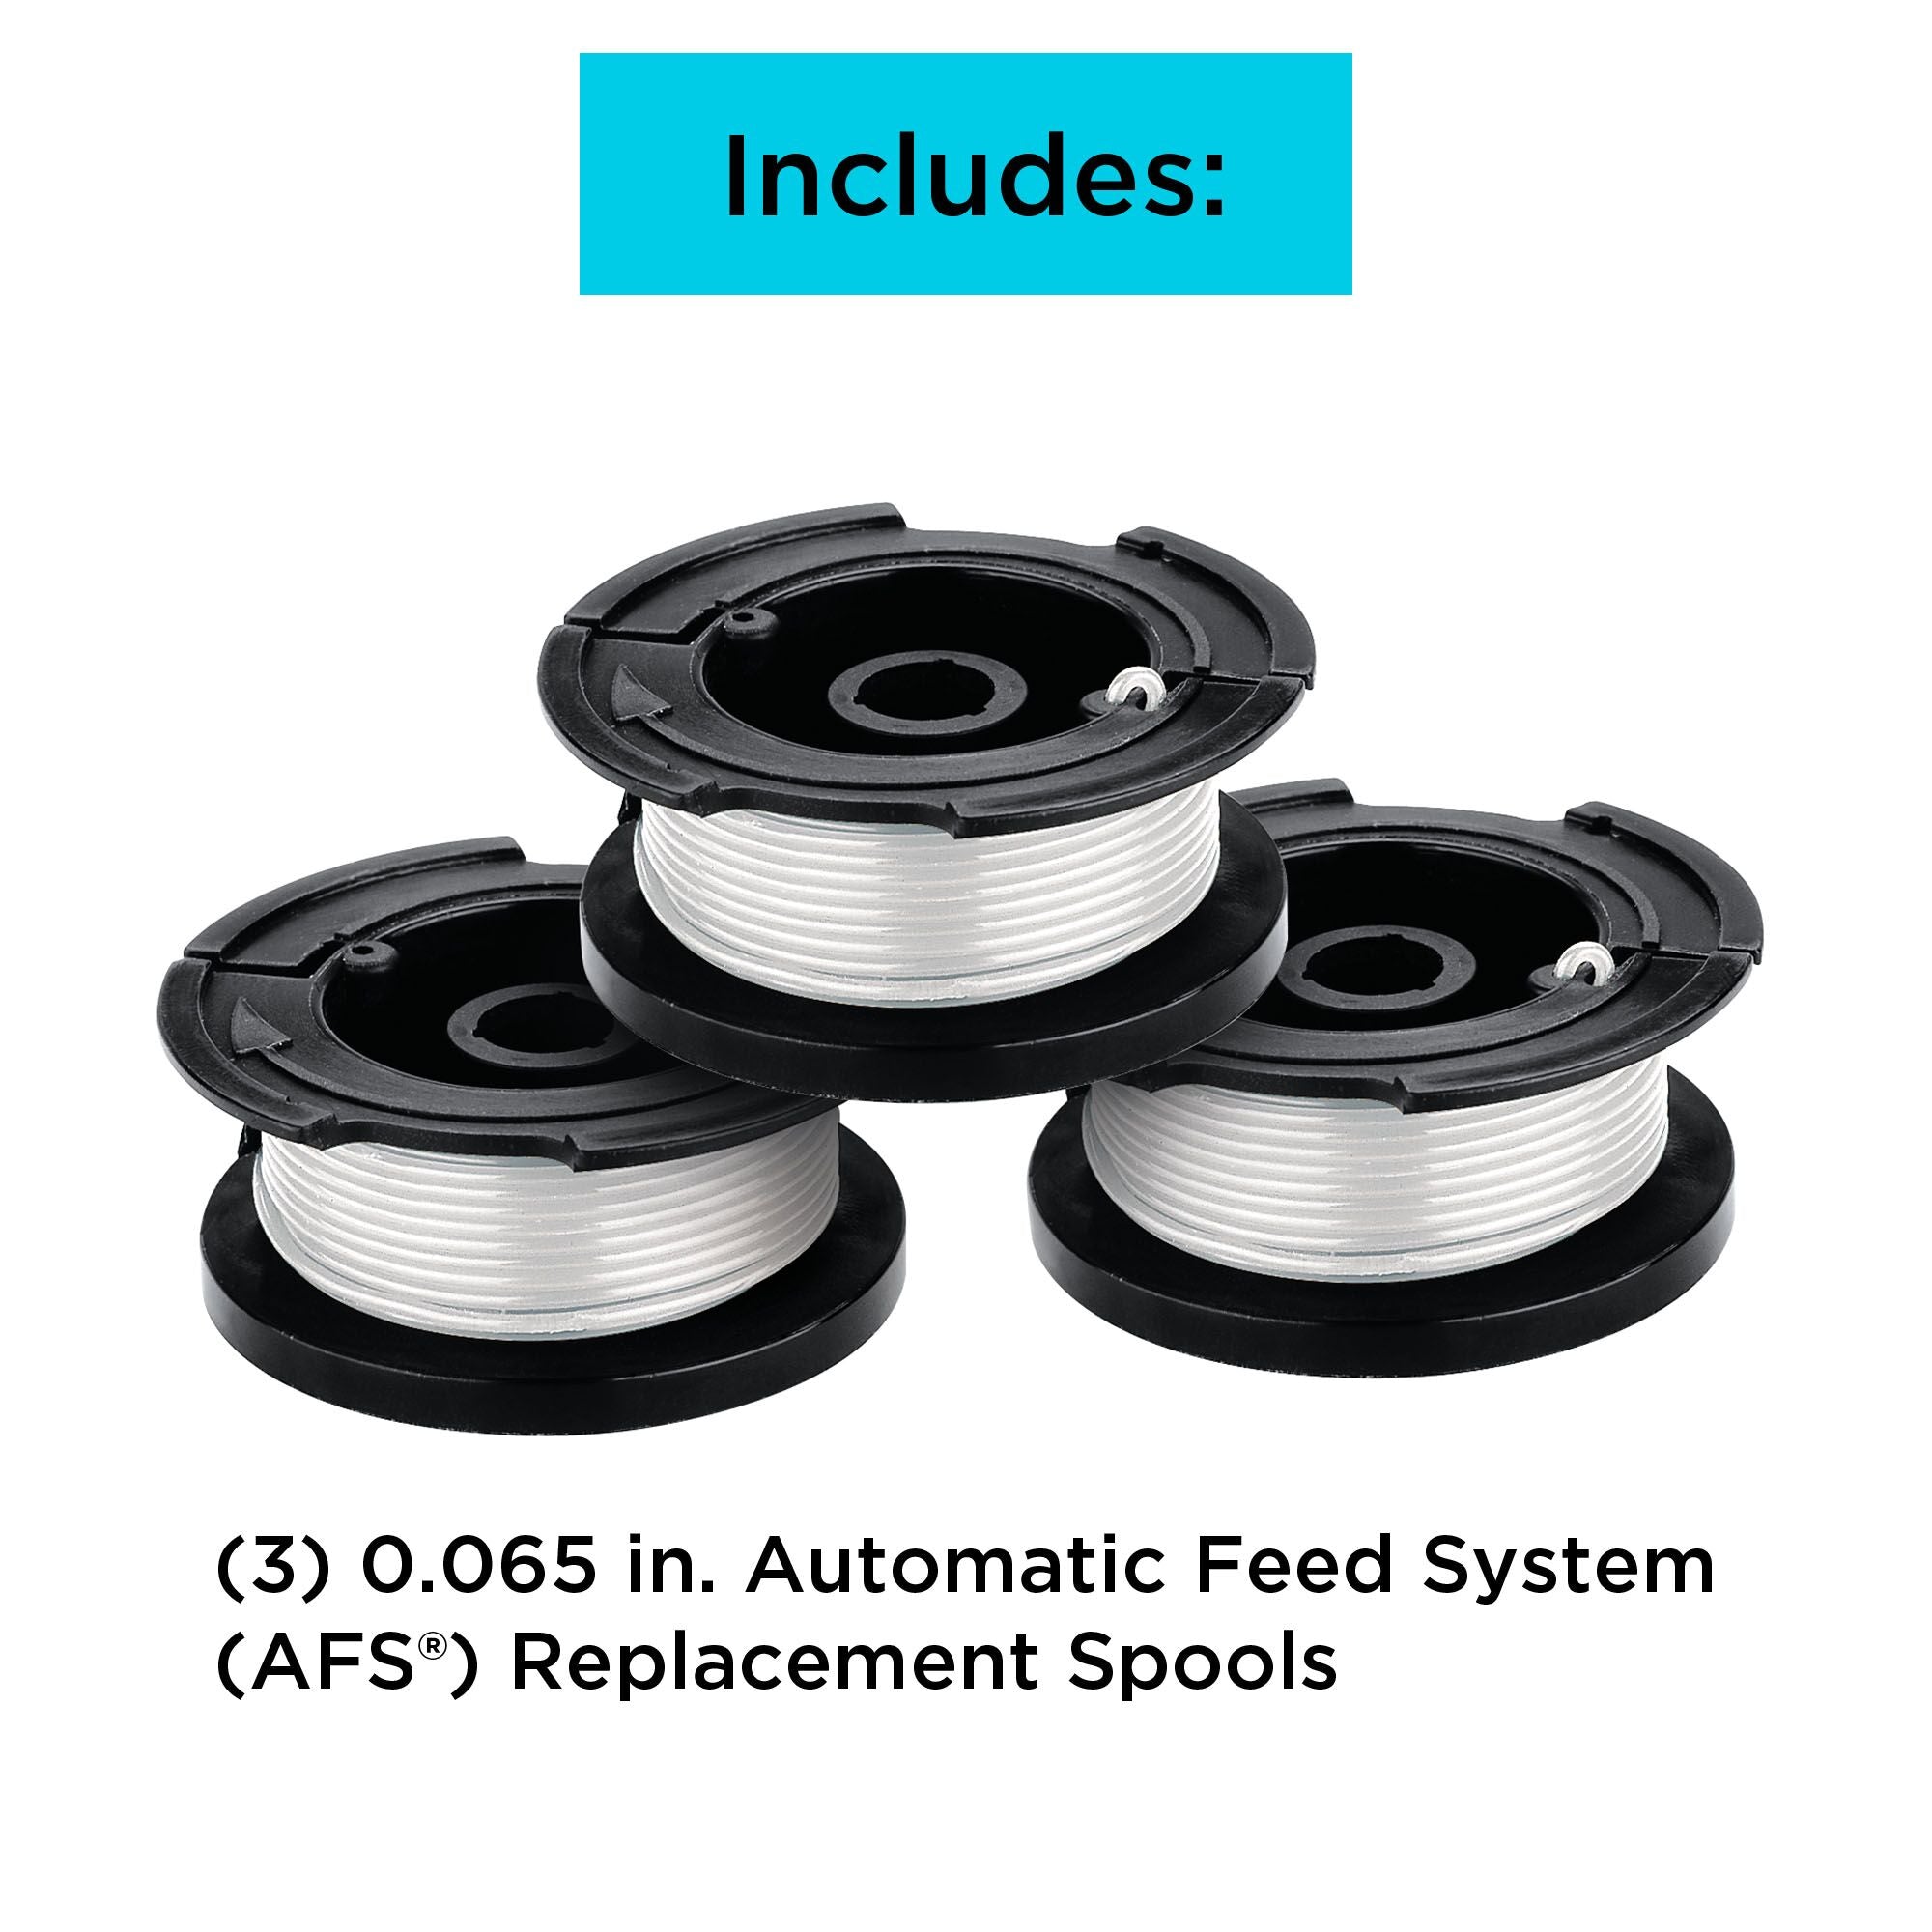 BLACK+DECKER 0.065 in. x 30 ft. Replacement Single Line Automatic Feed Spools AFS for Electric String Grass Trimmer/Edger (3-Pack).